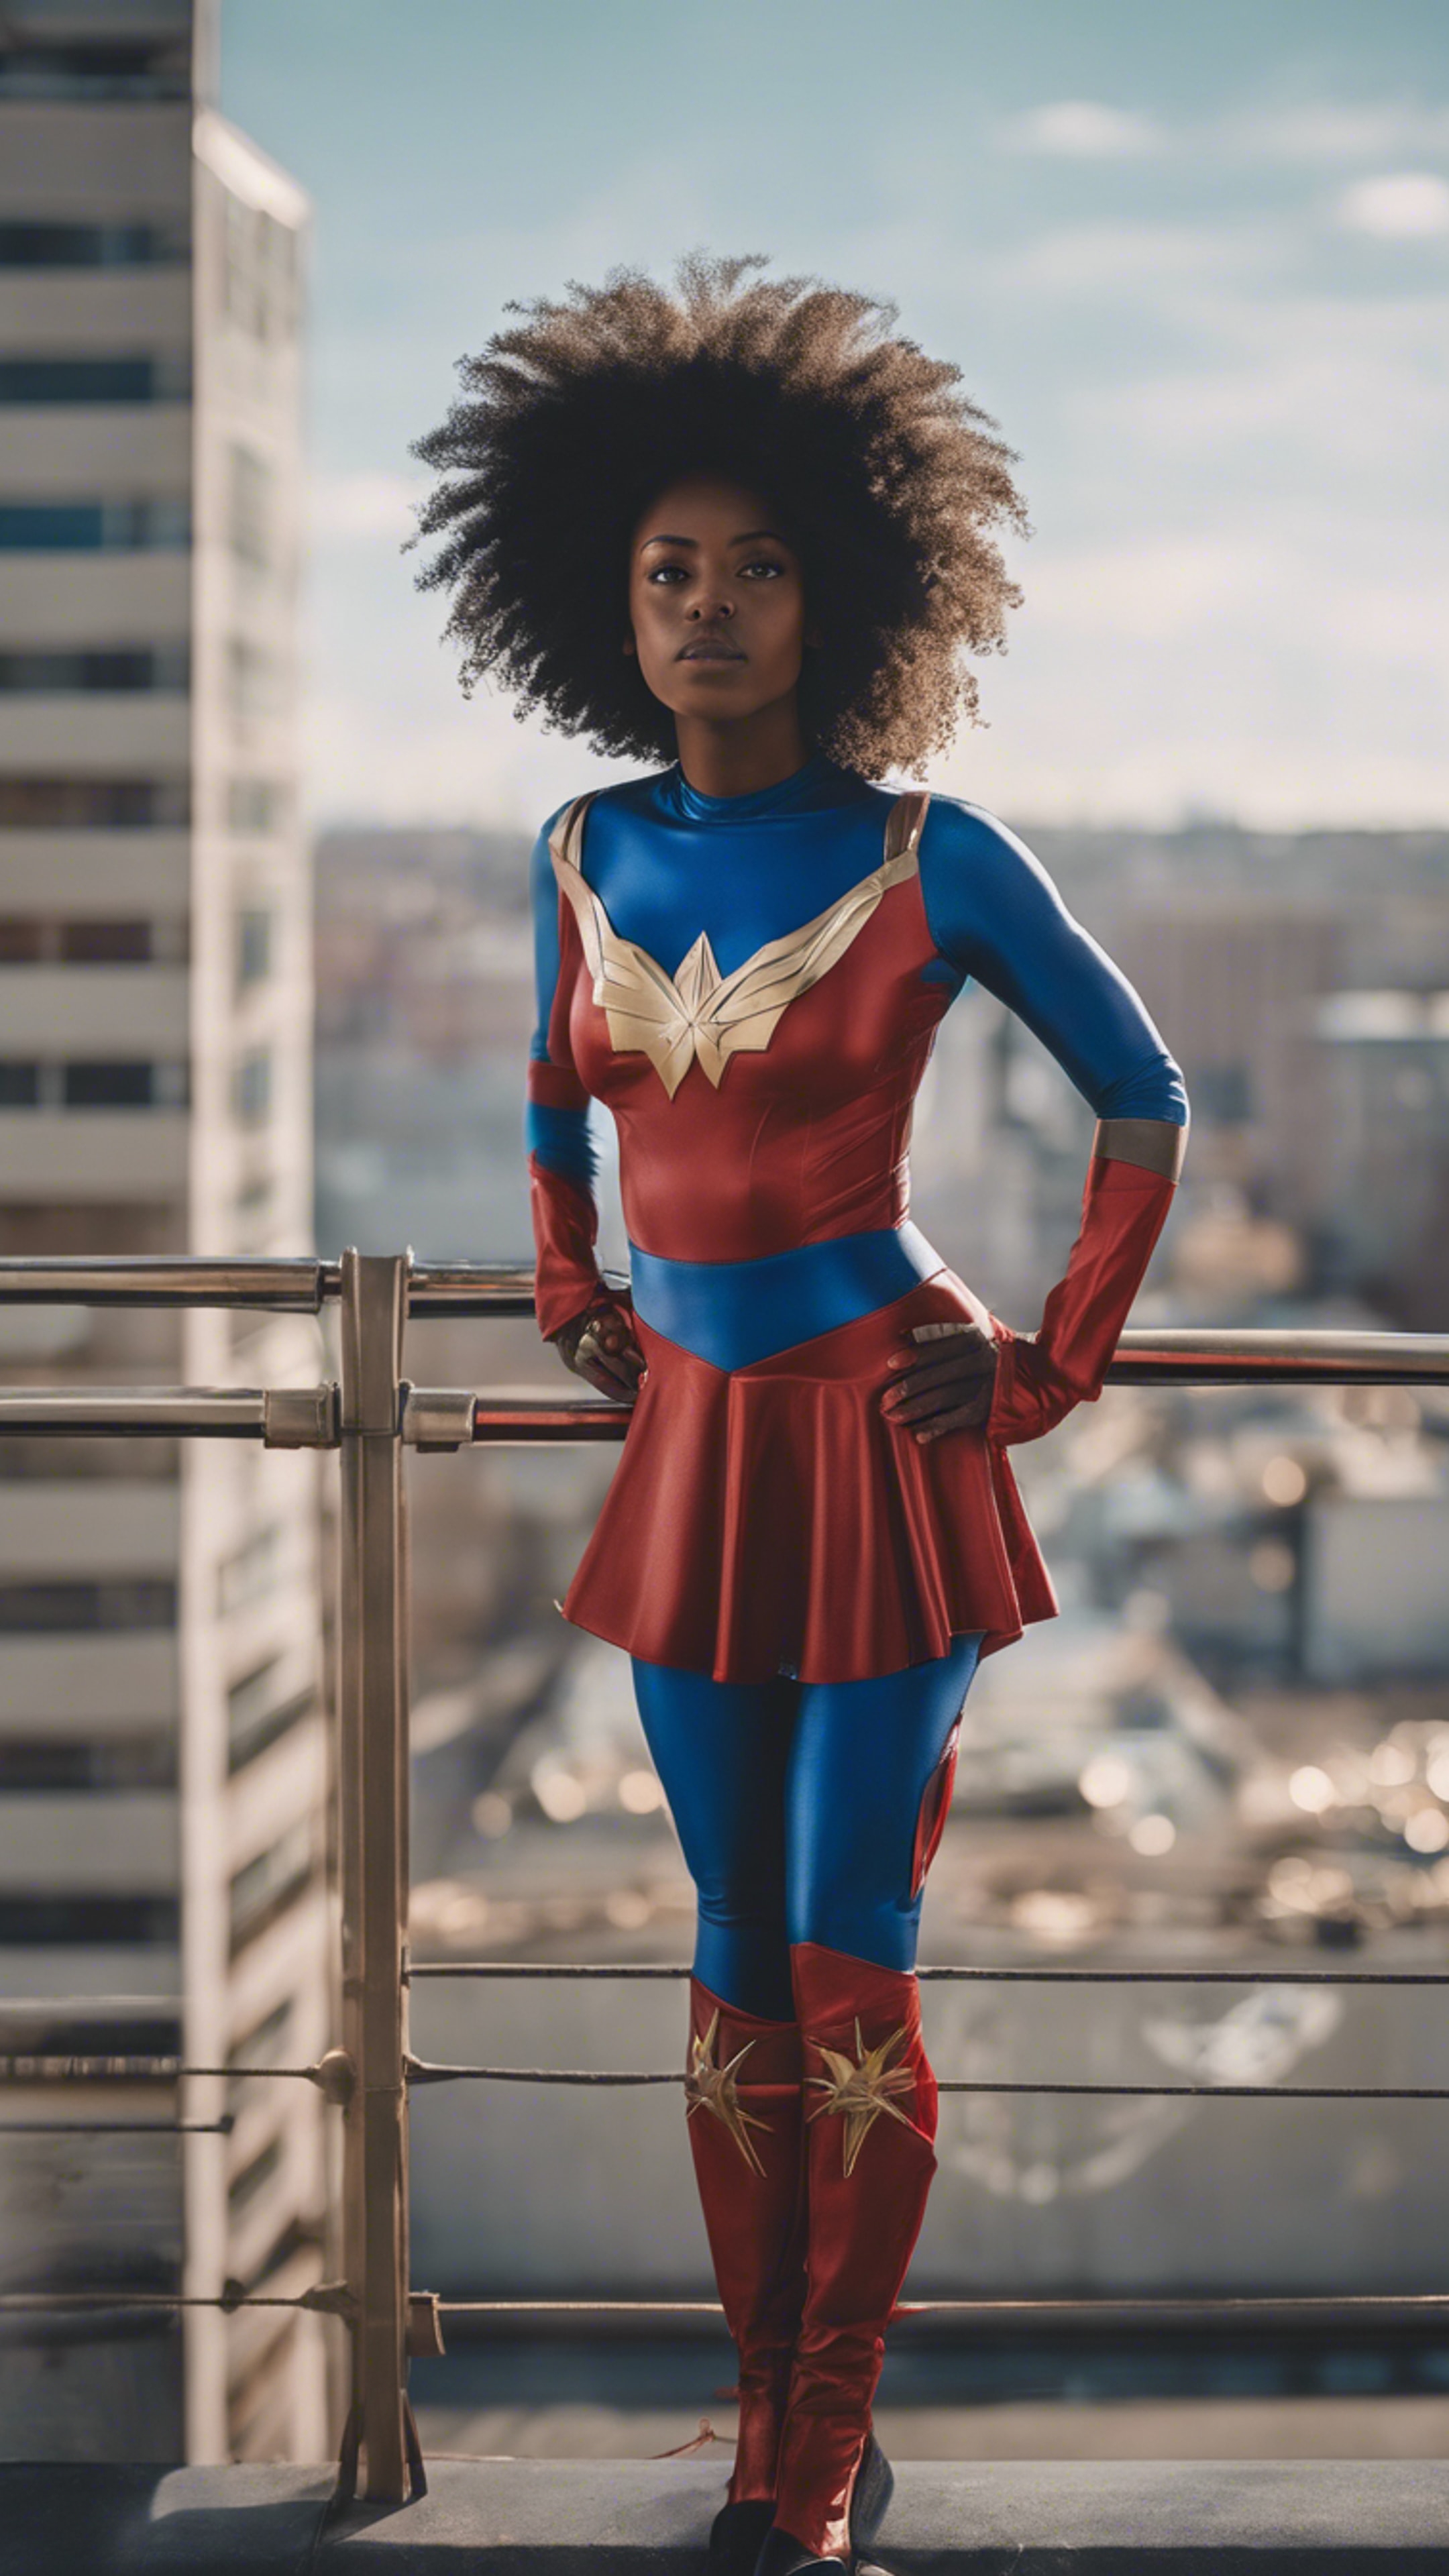 A black girl wearing a superhero costume, standing strong on top of a tall building. טפט[591a0dfe38314cf2b9da]